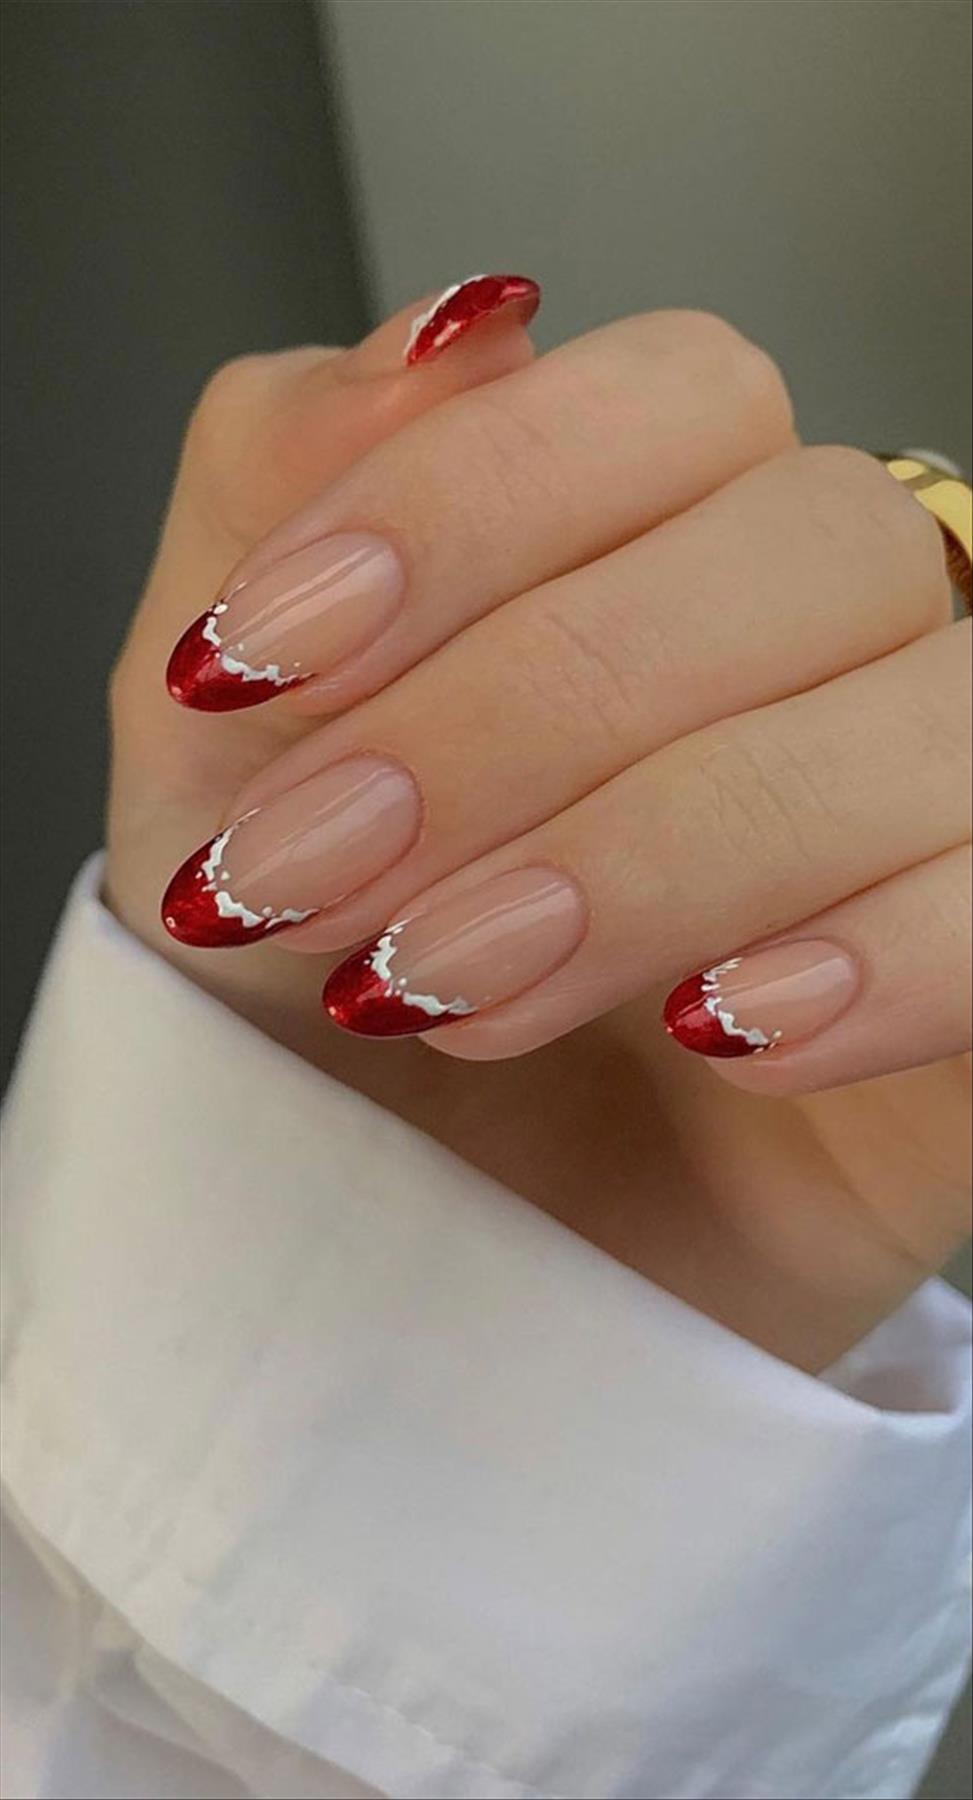 Red French nails design for Winter nail colors 